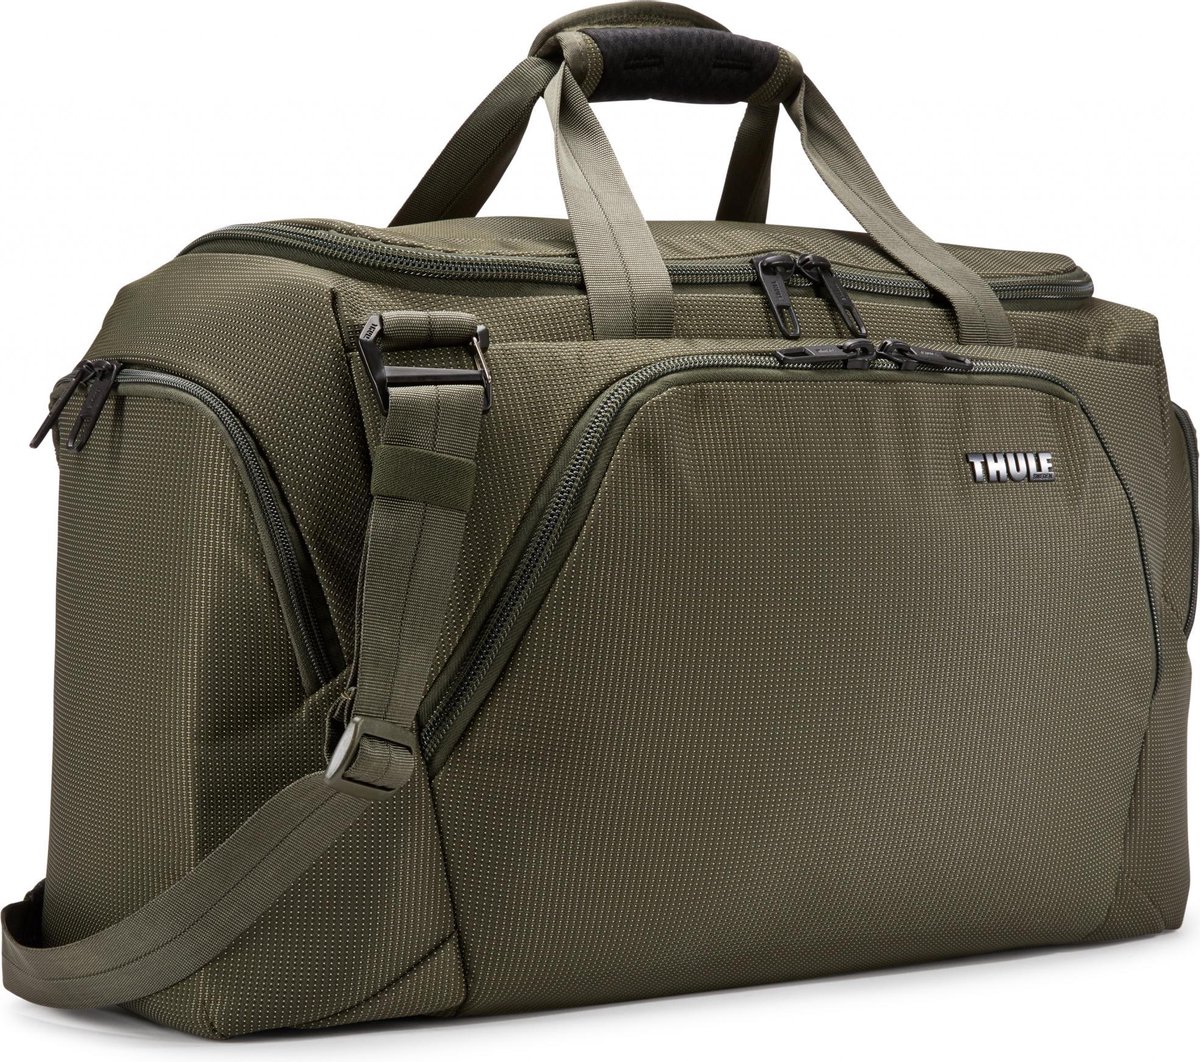 Thule Crossover 2 Duffel 44 Liter - Forest Night